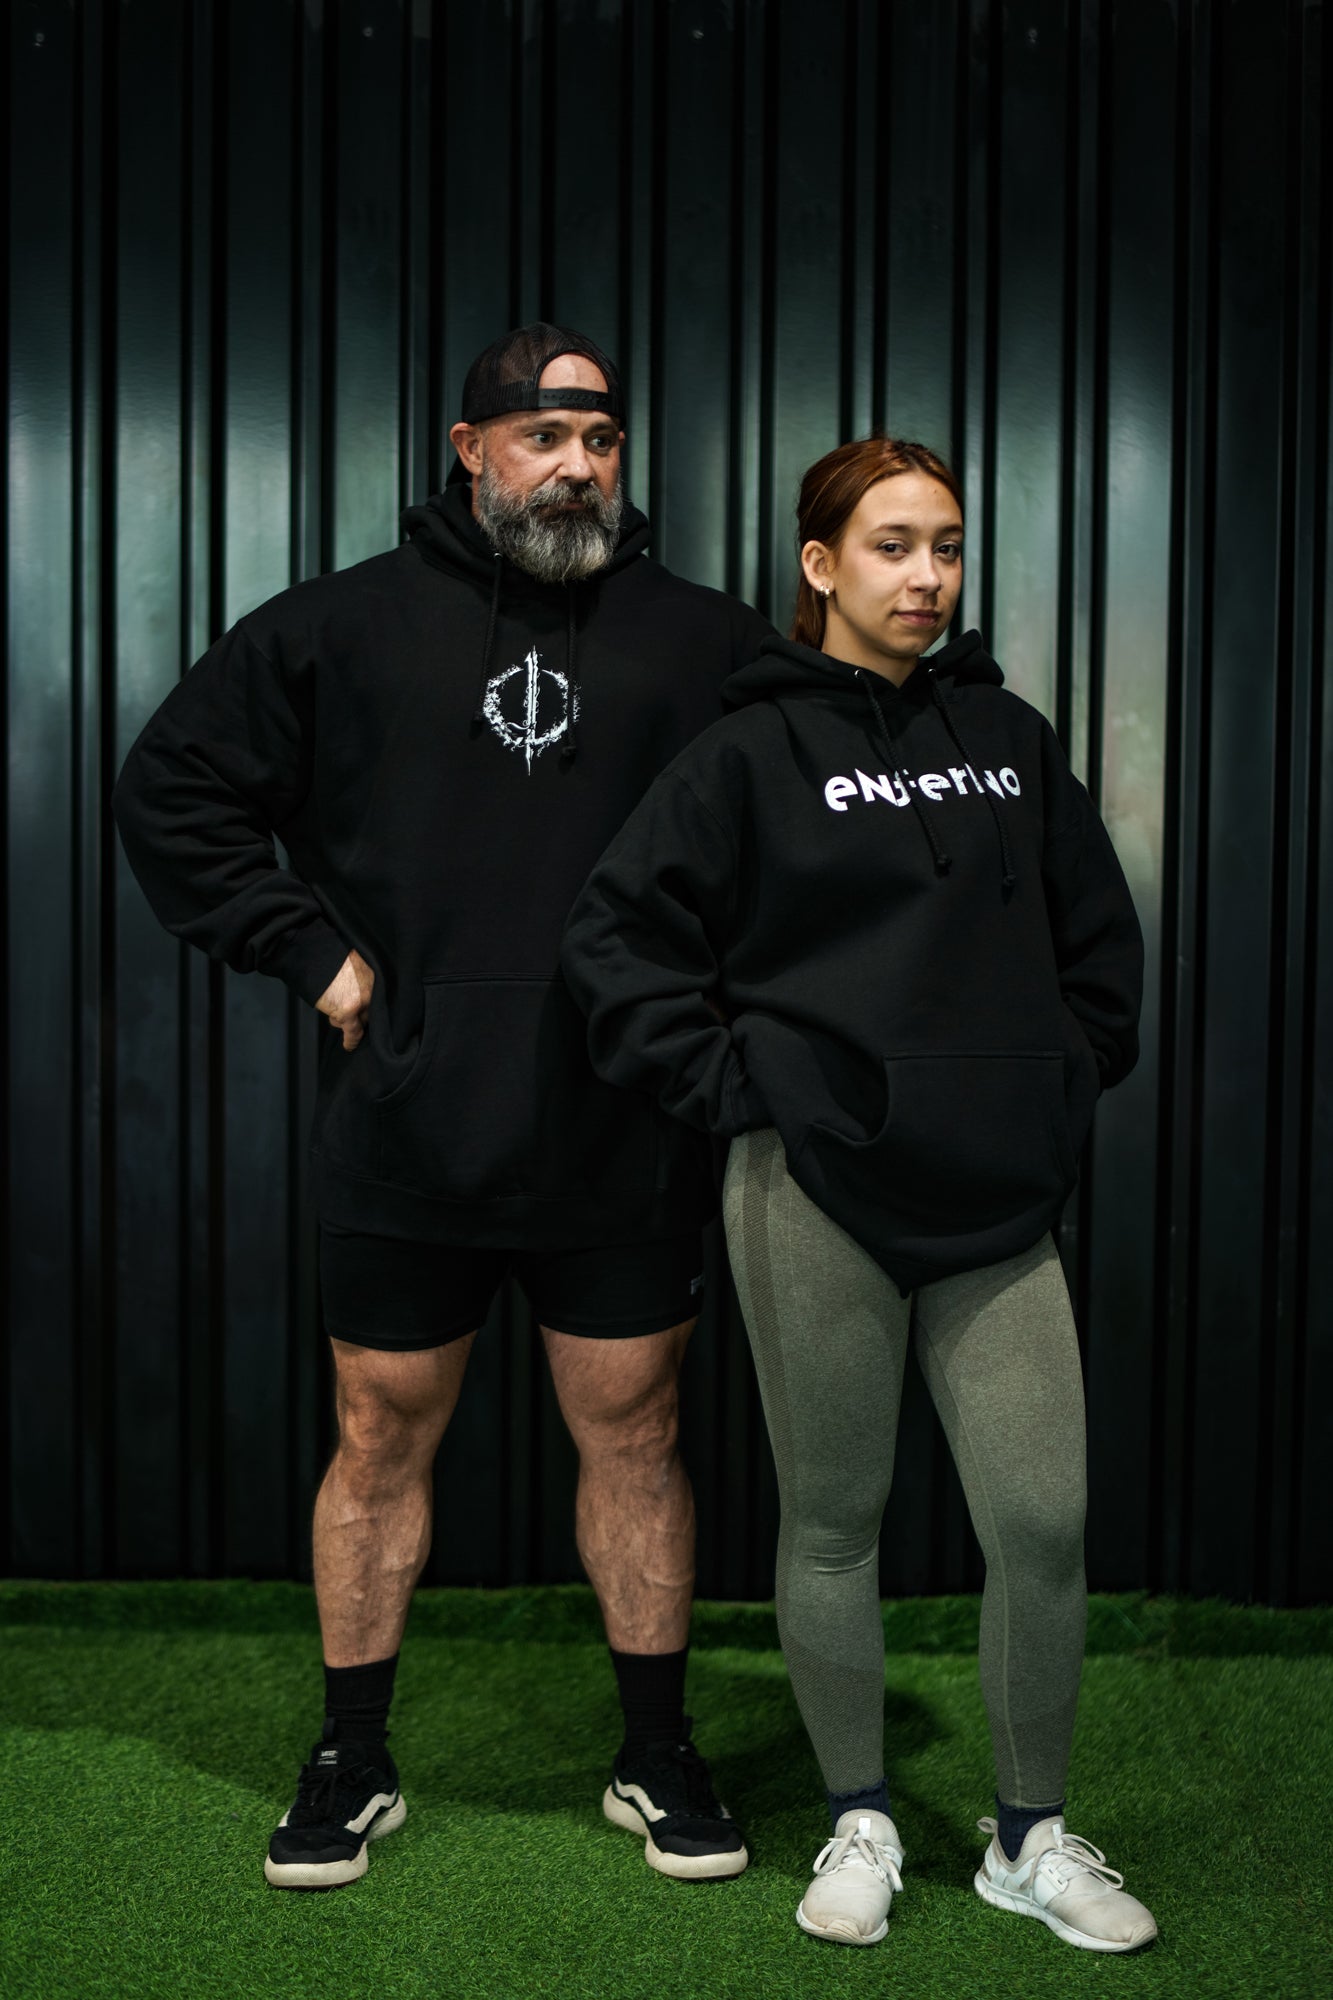 Enferno X-Ray Unicorn Hoodie in Black and Enferno Repeat Logo Hoodie in Black on models Madelyn & Grady.